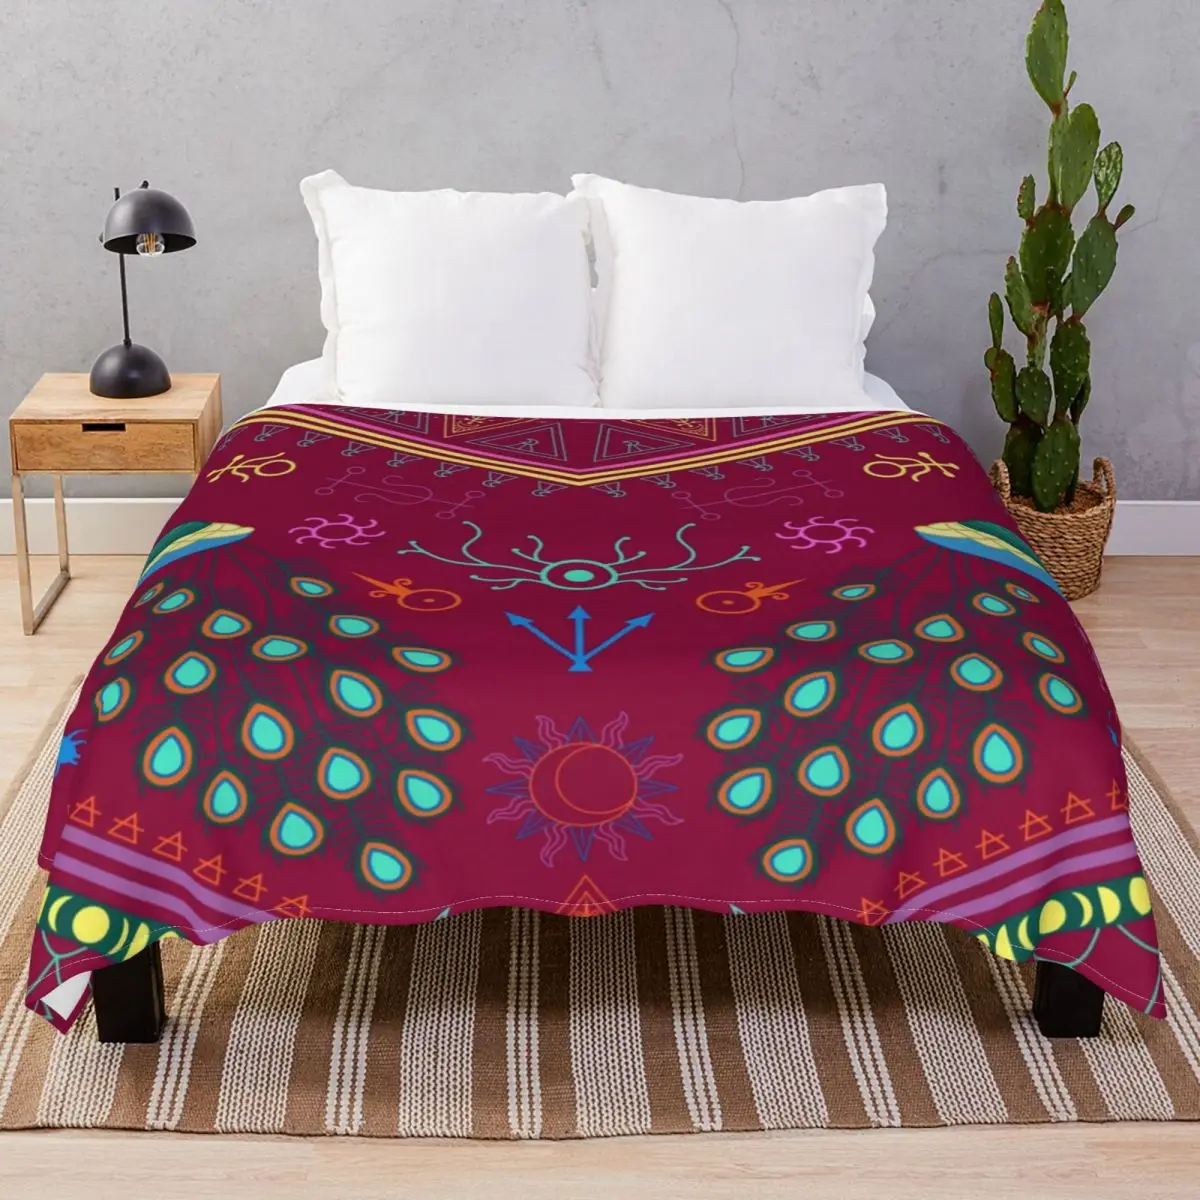 Mollymauk Tealeaf Inspired Print Blankets Fleece Summer Ultra-Soft Unisex Throw Blanket for Bedding Home Couch Camp Office